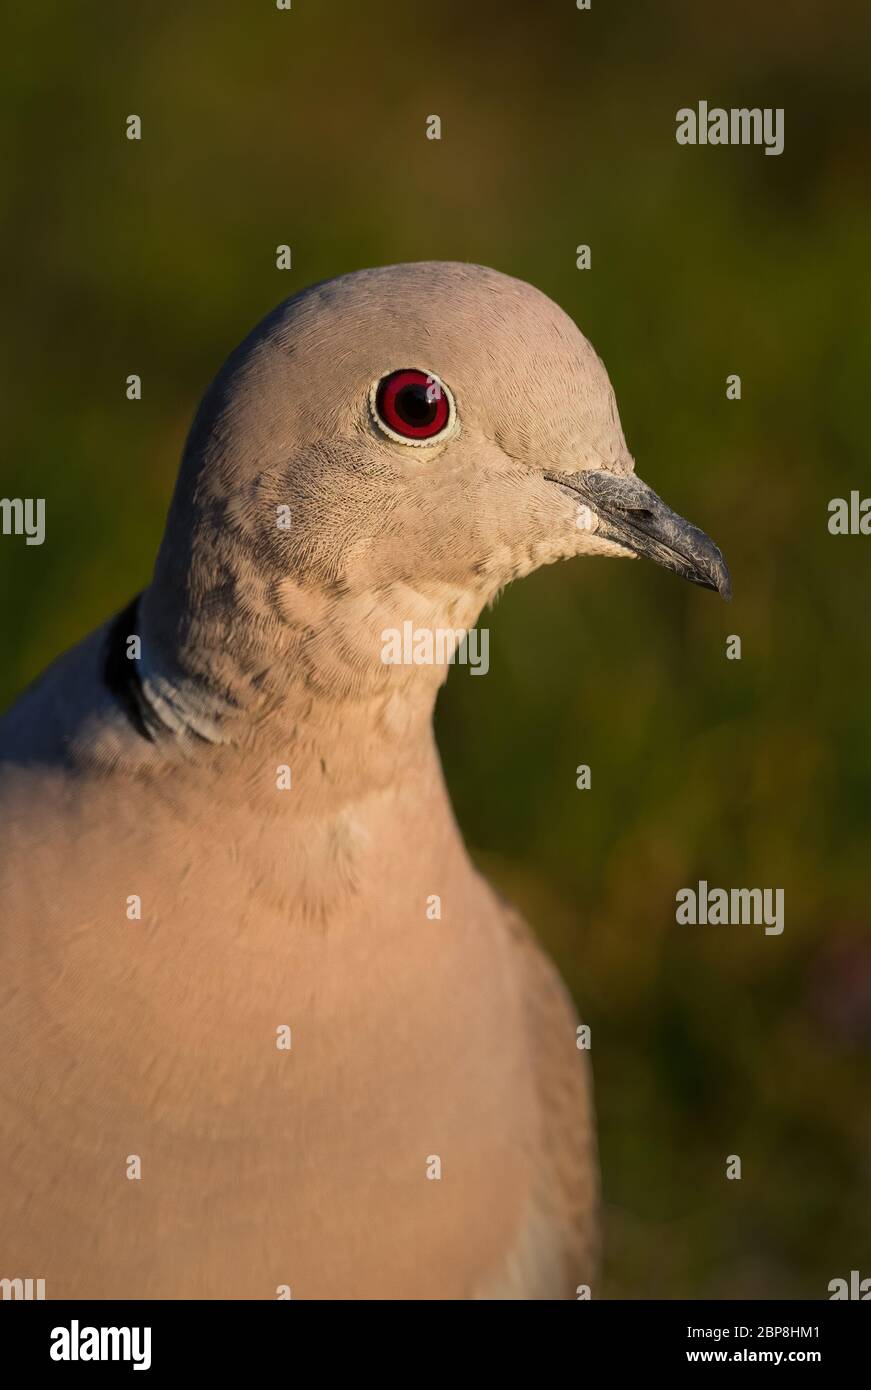 Eurasian Collared Dove - Streptopelia decaocto, portrait of common dove from European forests and woodlands, Zlin, Czech Republic. Stock Photo